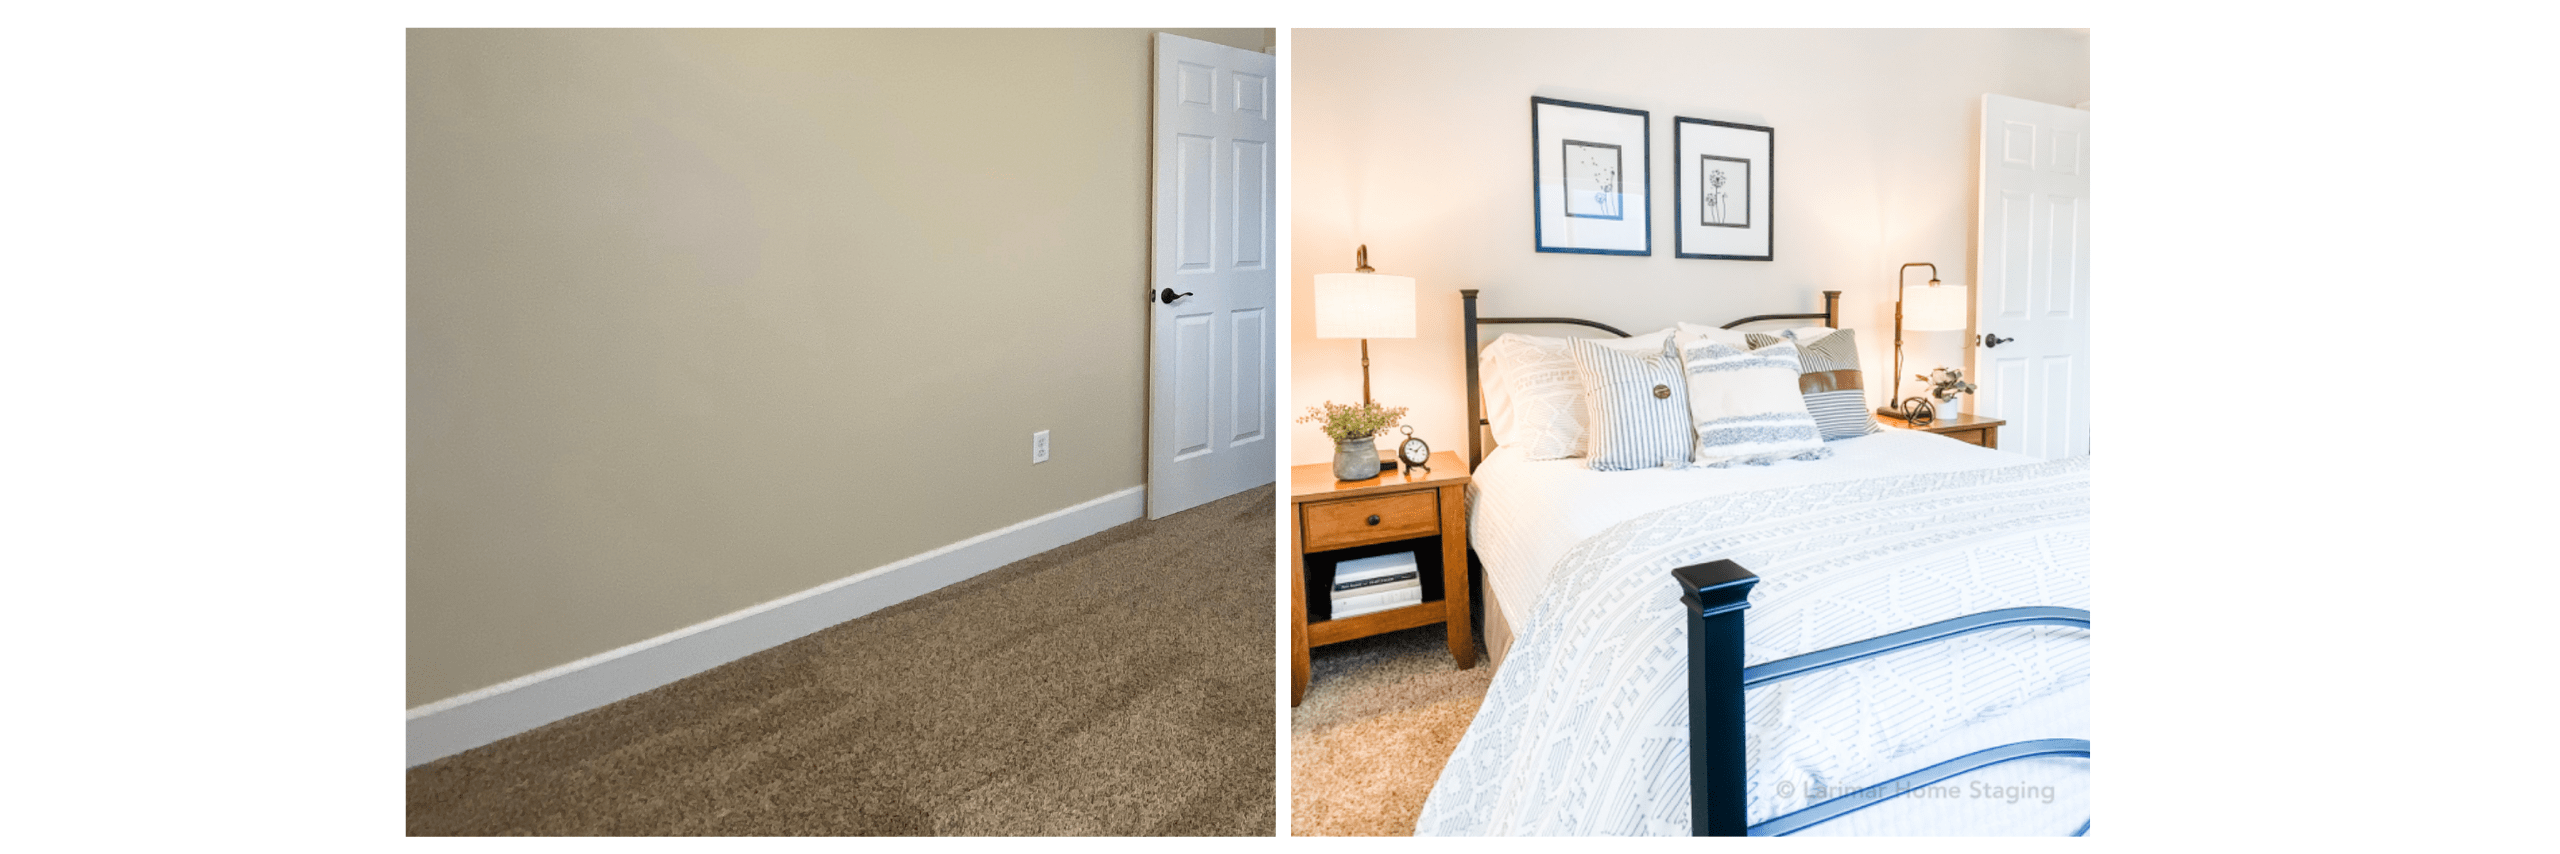 Home Staging Before After Guest Bedroom